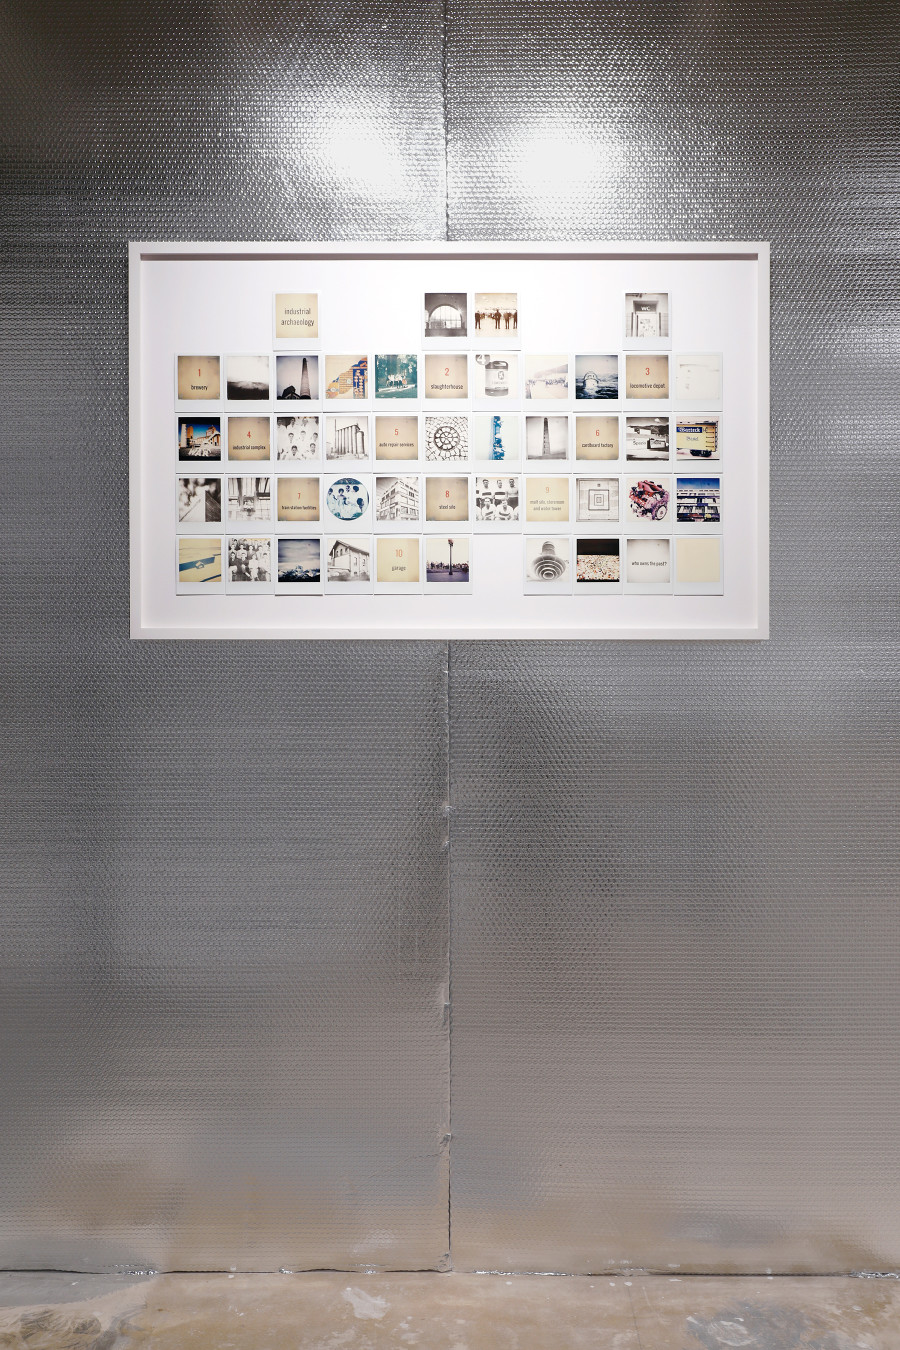 Jorge Conde, Archaeological matrix: Who owns the past?, 2019-2020 Polaroid 68 x 112 cm. Credit photo: Neige Sanchez. Courtesy of the Artist and Fabienne Levy.